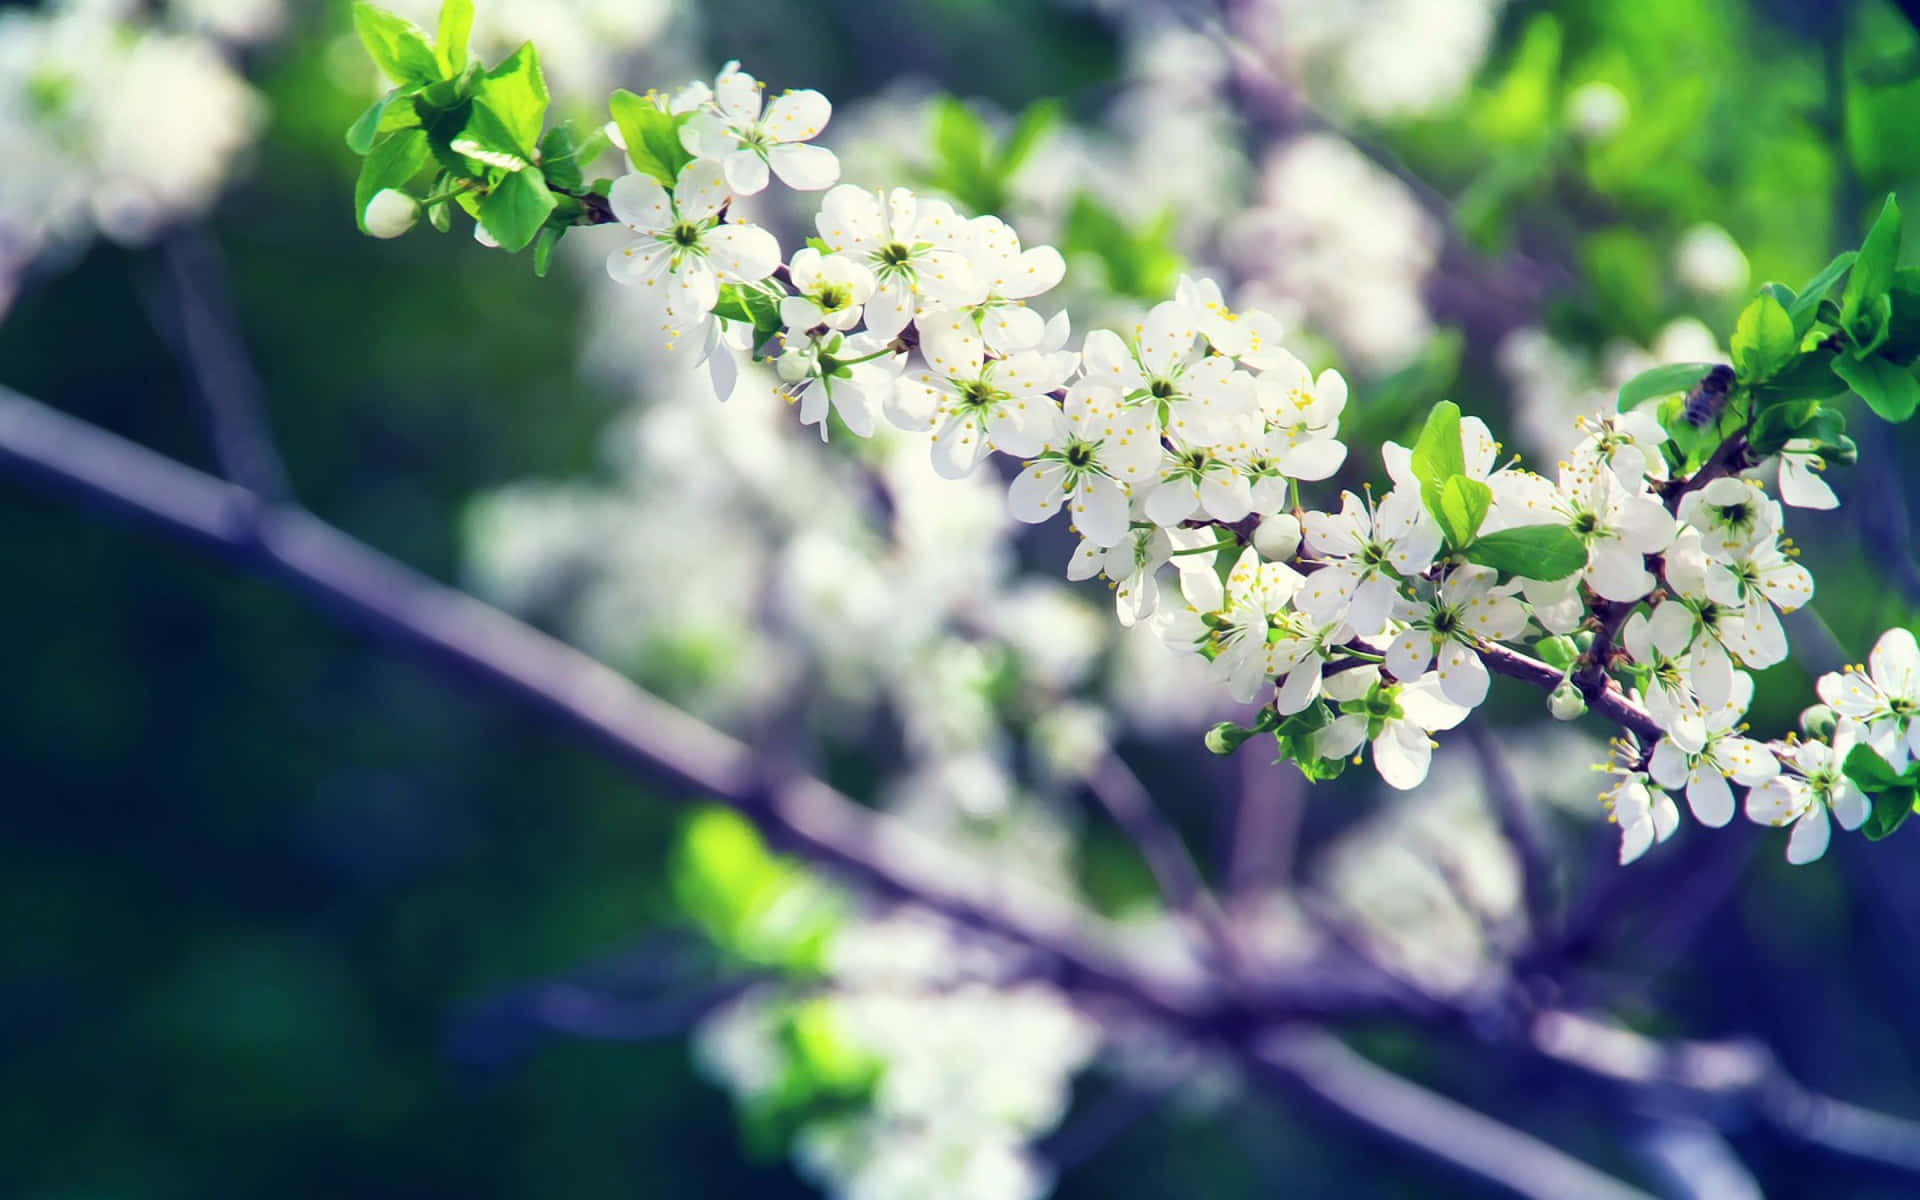 A White Flowering Tree With Green Leaves